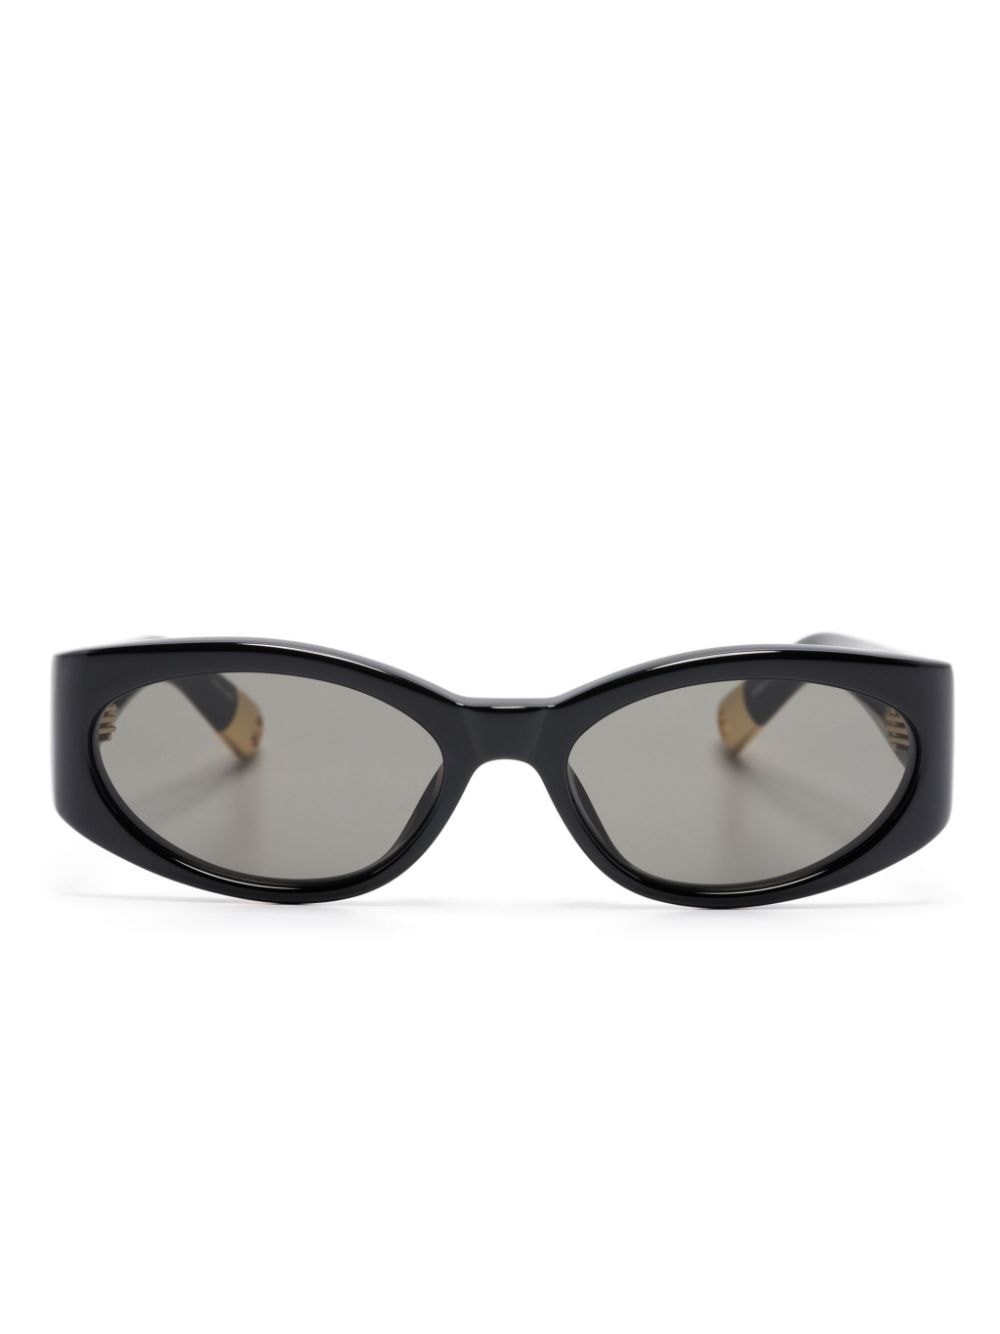 Jacquemus Les Lunettes Ovalo Oval Sunglasses In Schwarz